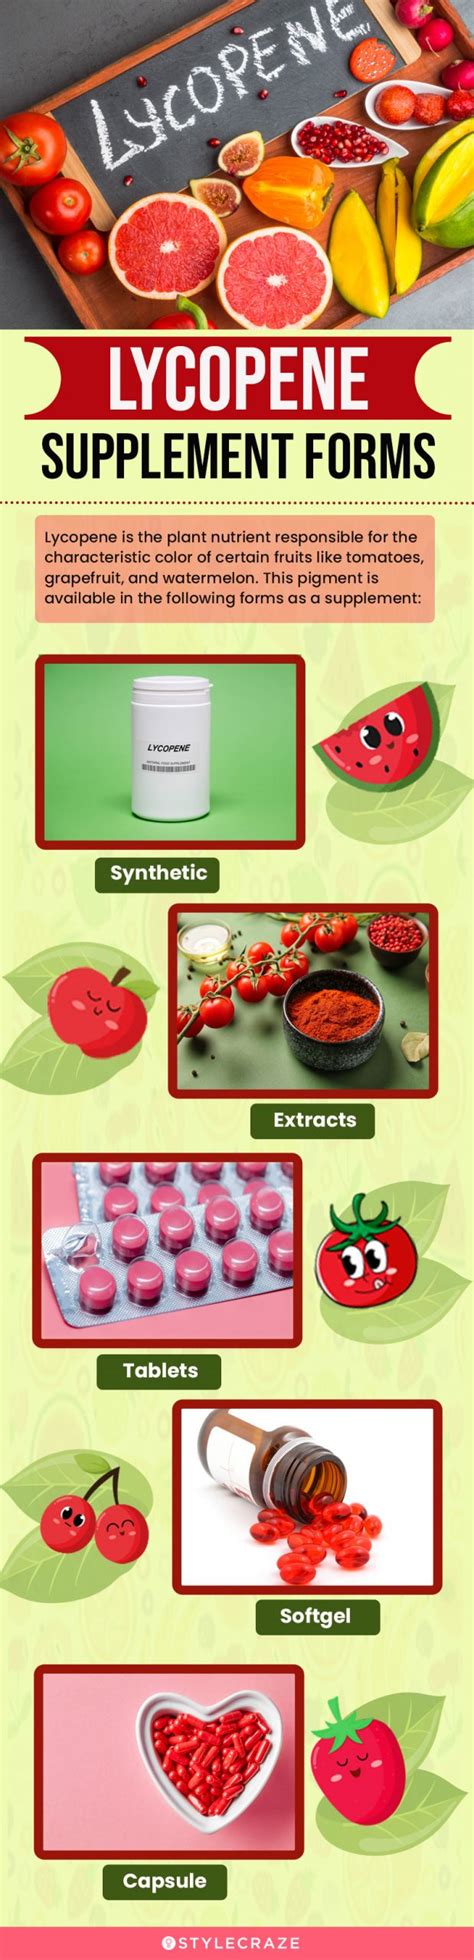 top 10 health benefits of lycopene side effects and dosage